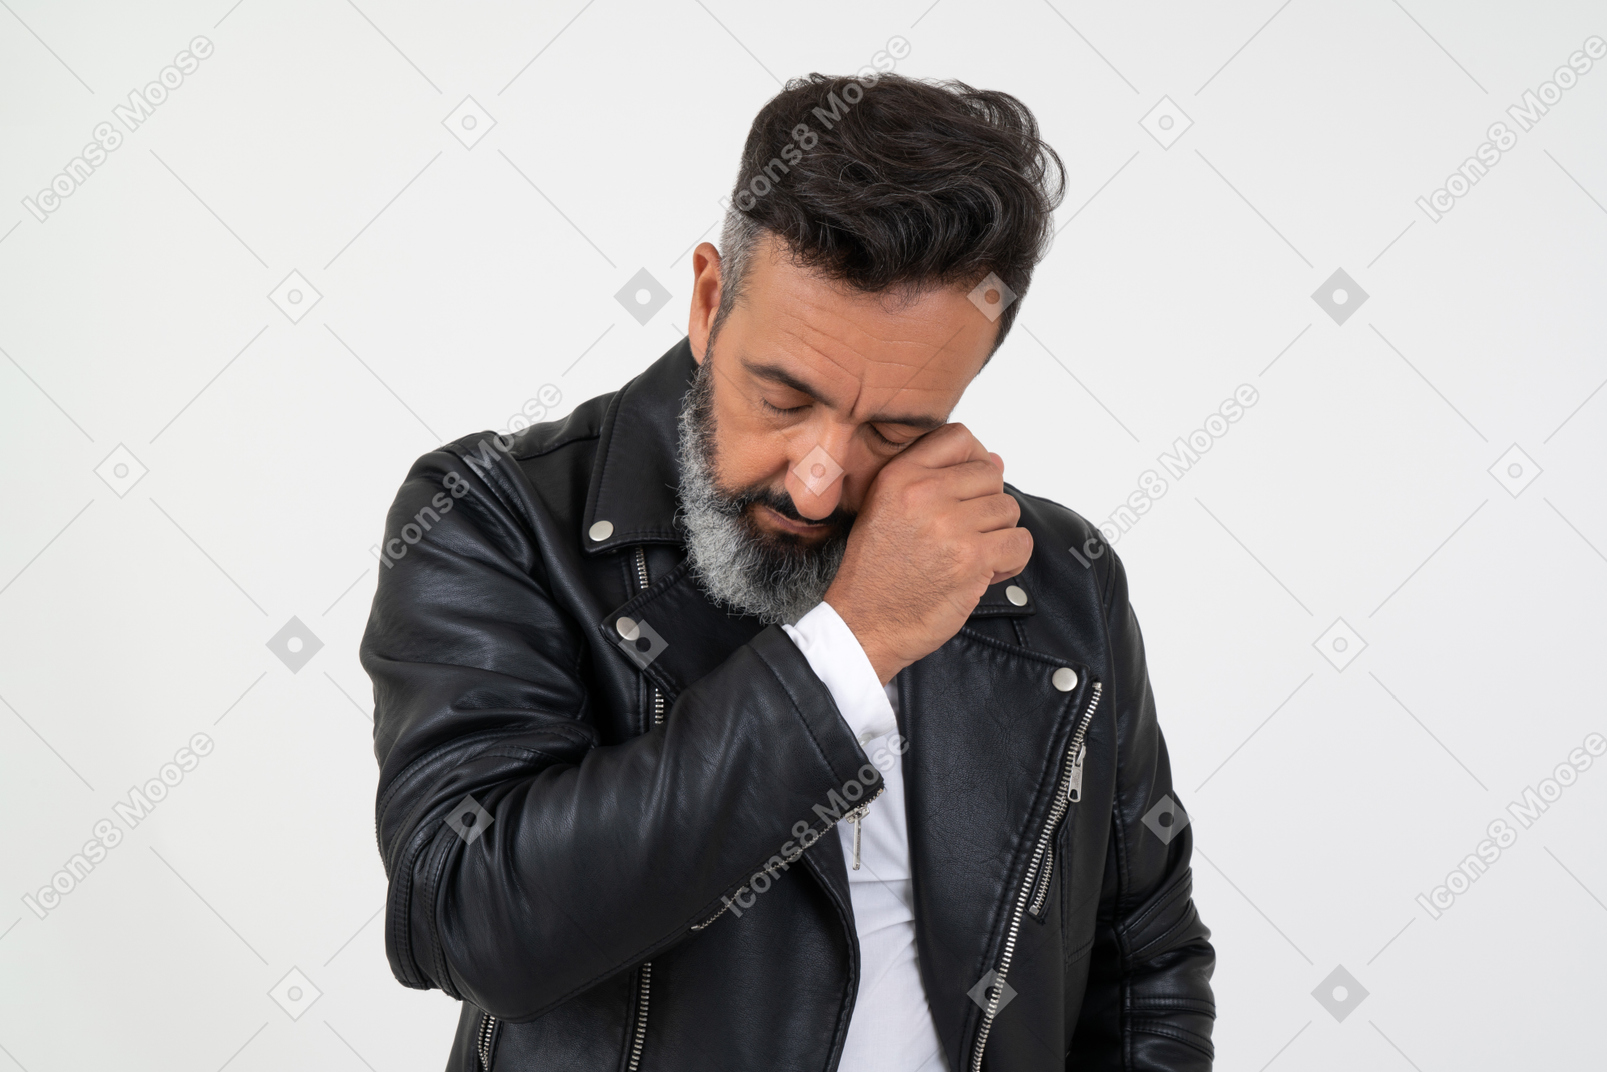 Mature man looking sad and wiping his tears